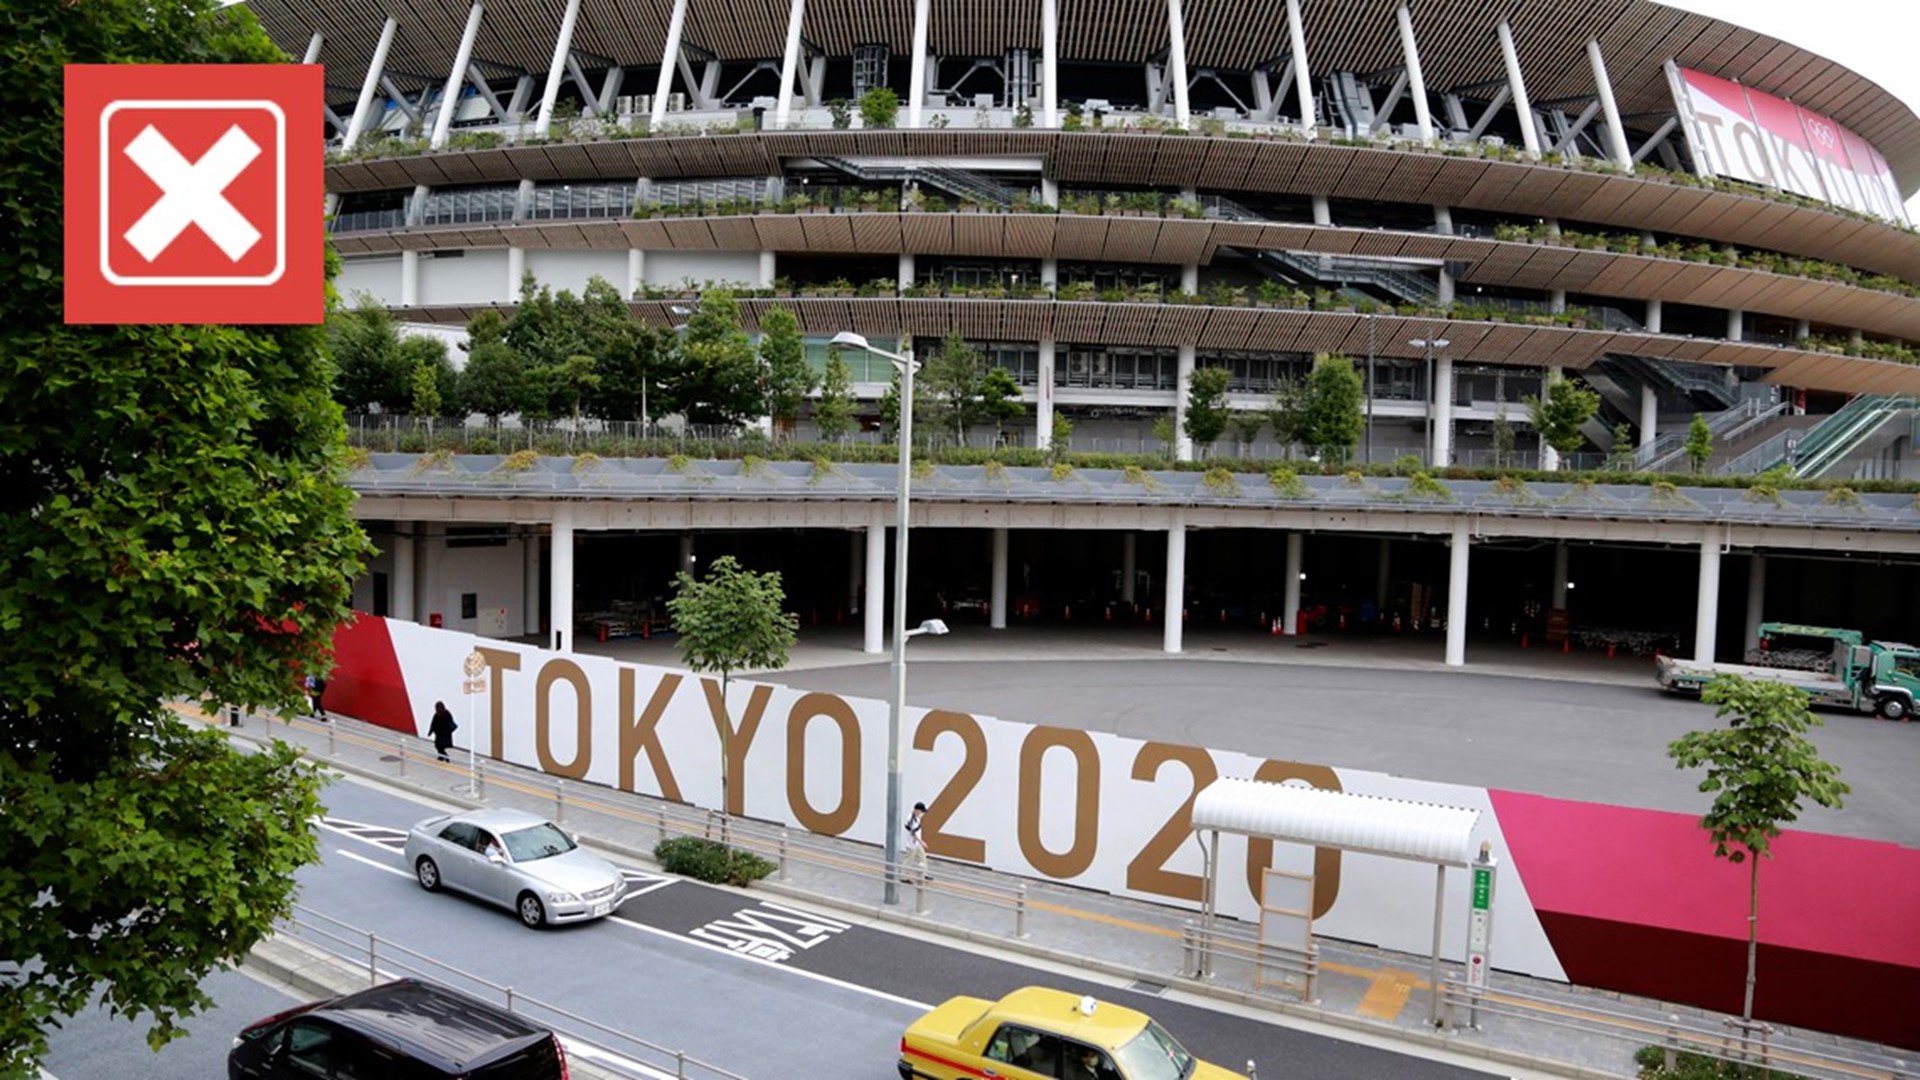 Ahead of the Games in Tokyo, people have shared misleading social media posts claiming Japan has banned Black Lives Matter apparel at the Olympics.